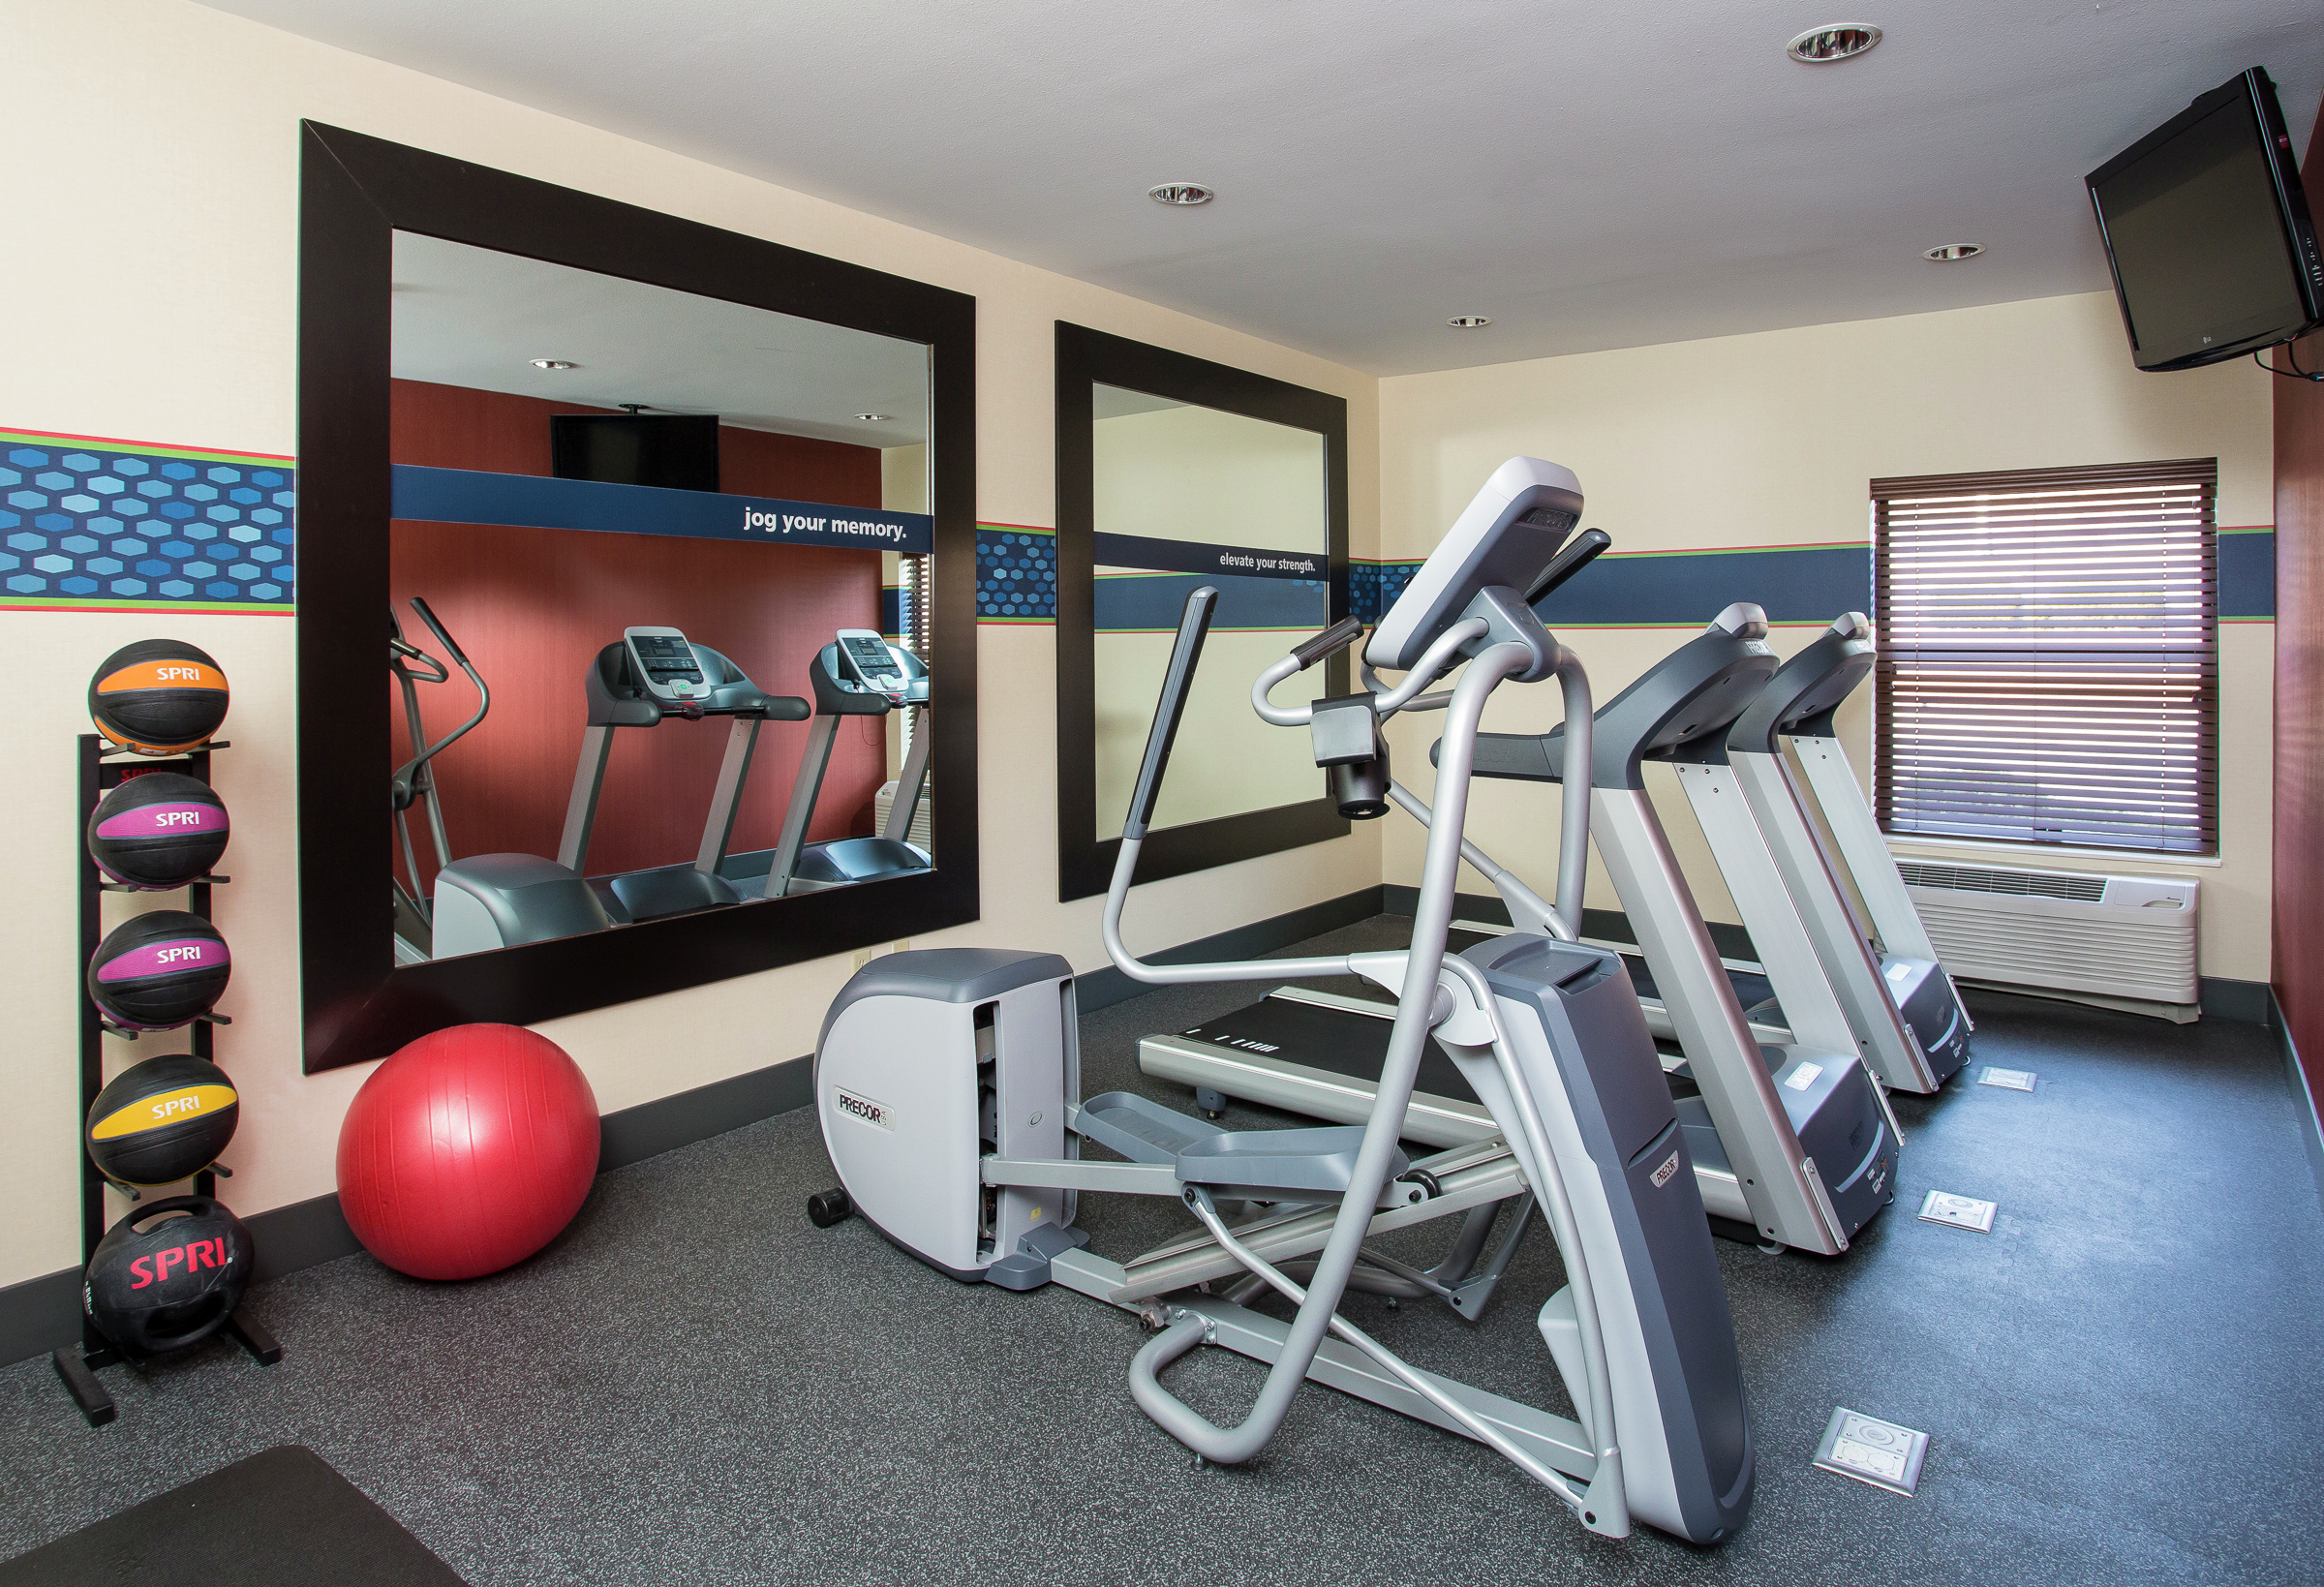 Room with fitness equipment